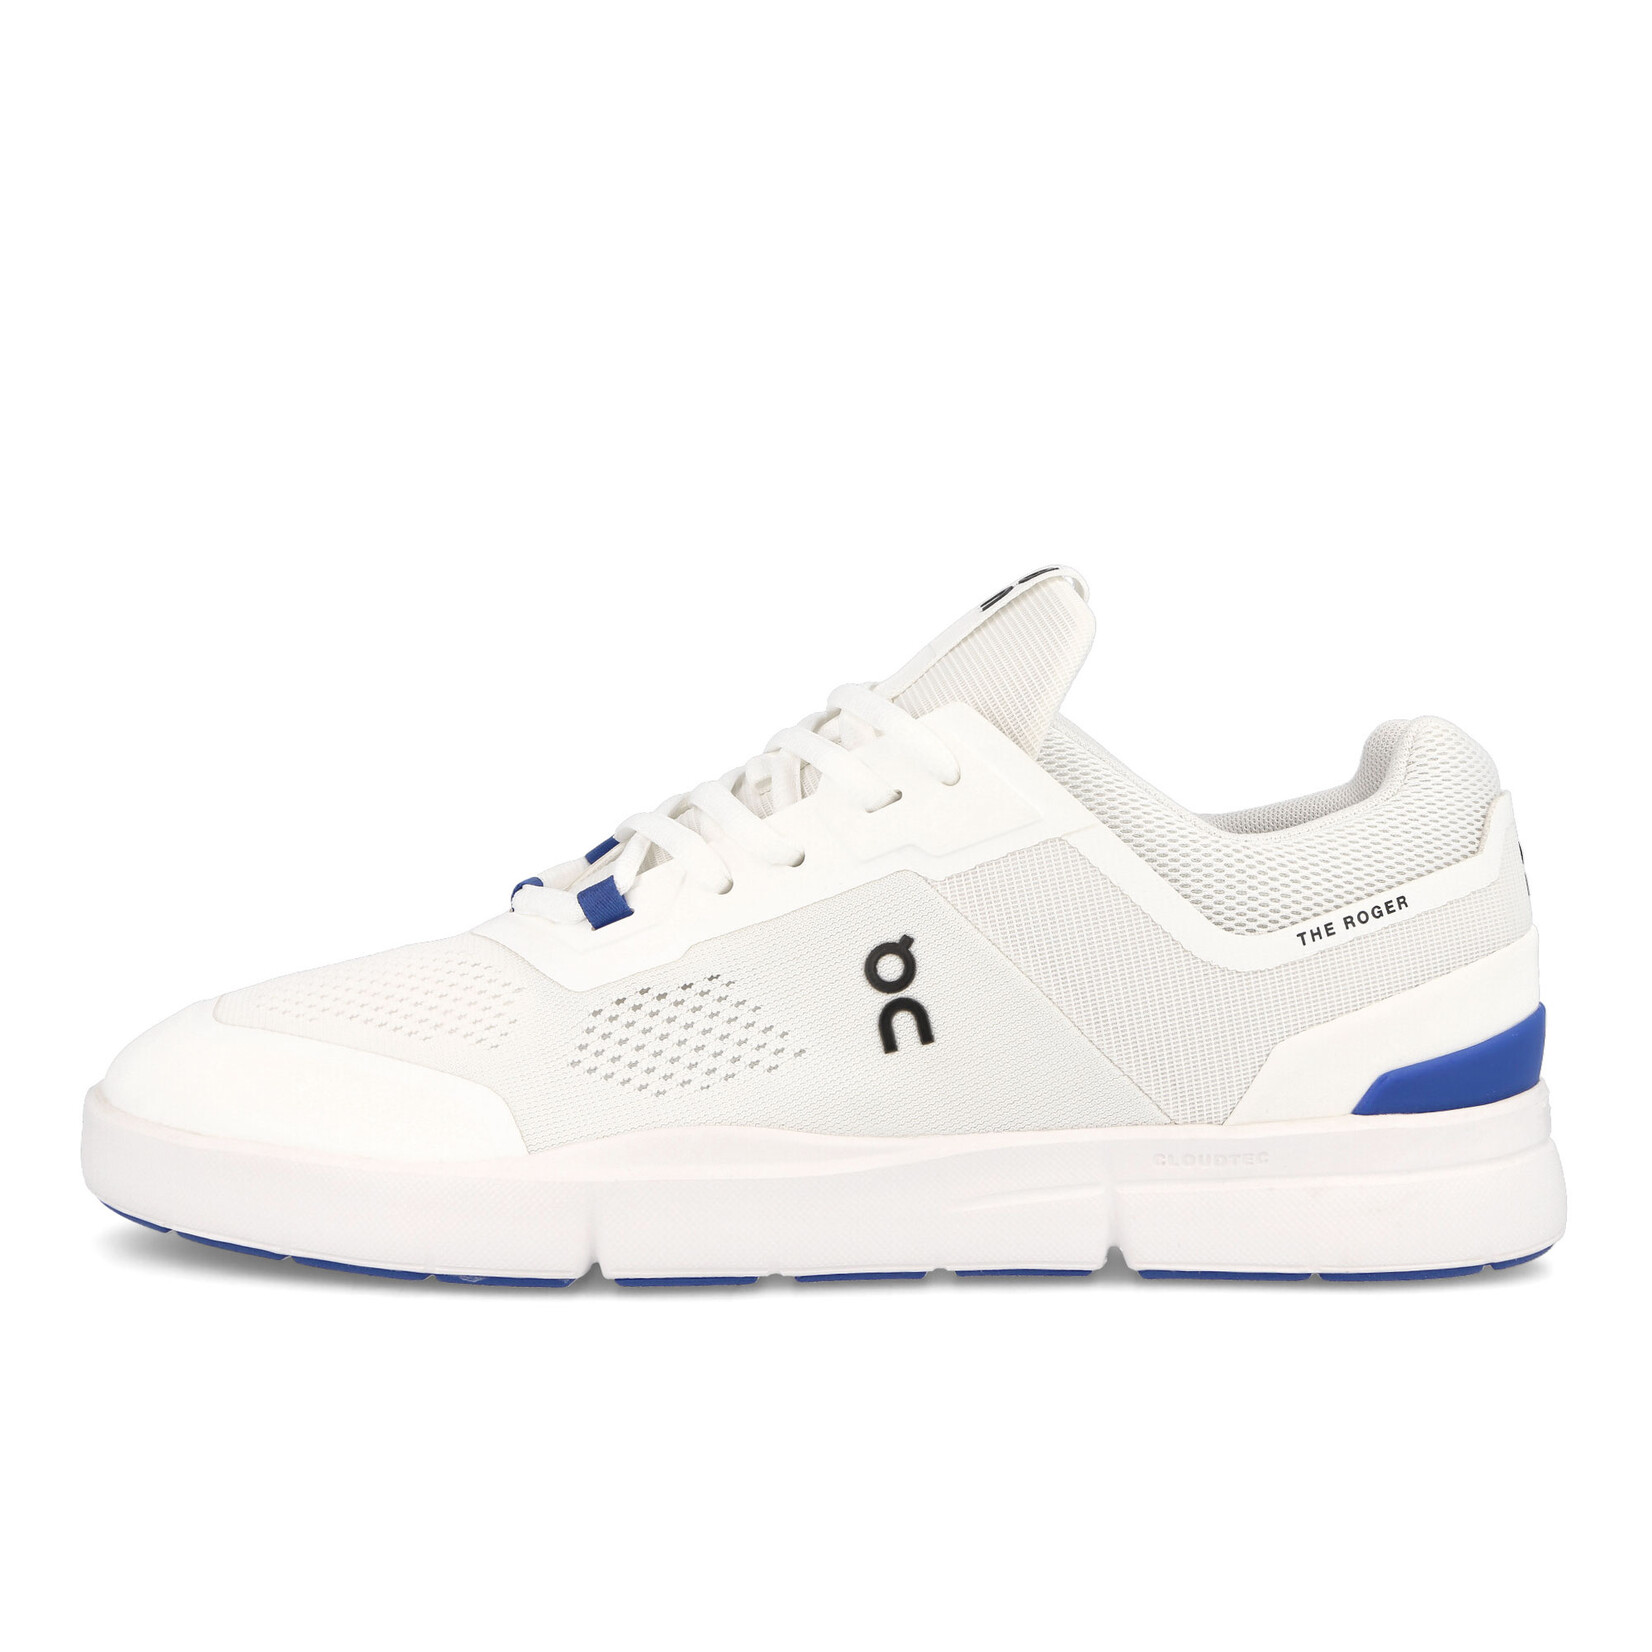 On On The Roger Spin Women's Lifestyle Shoes